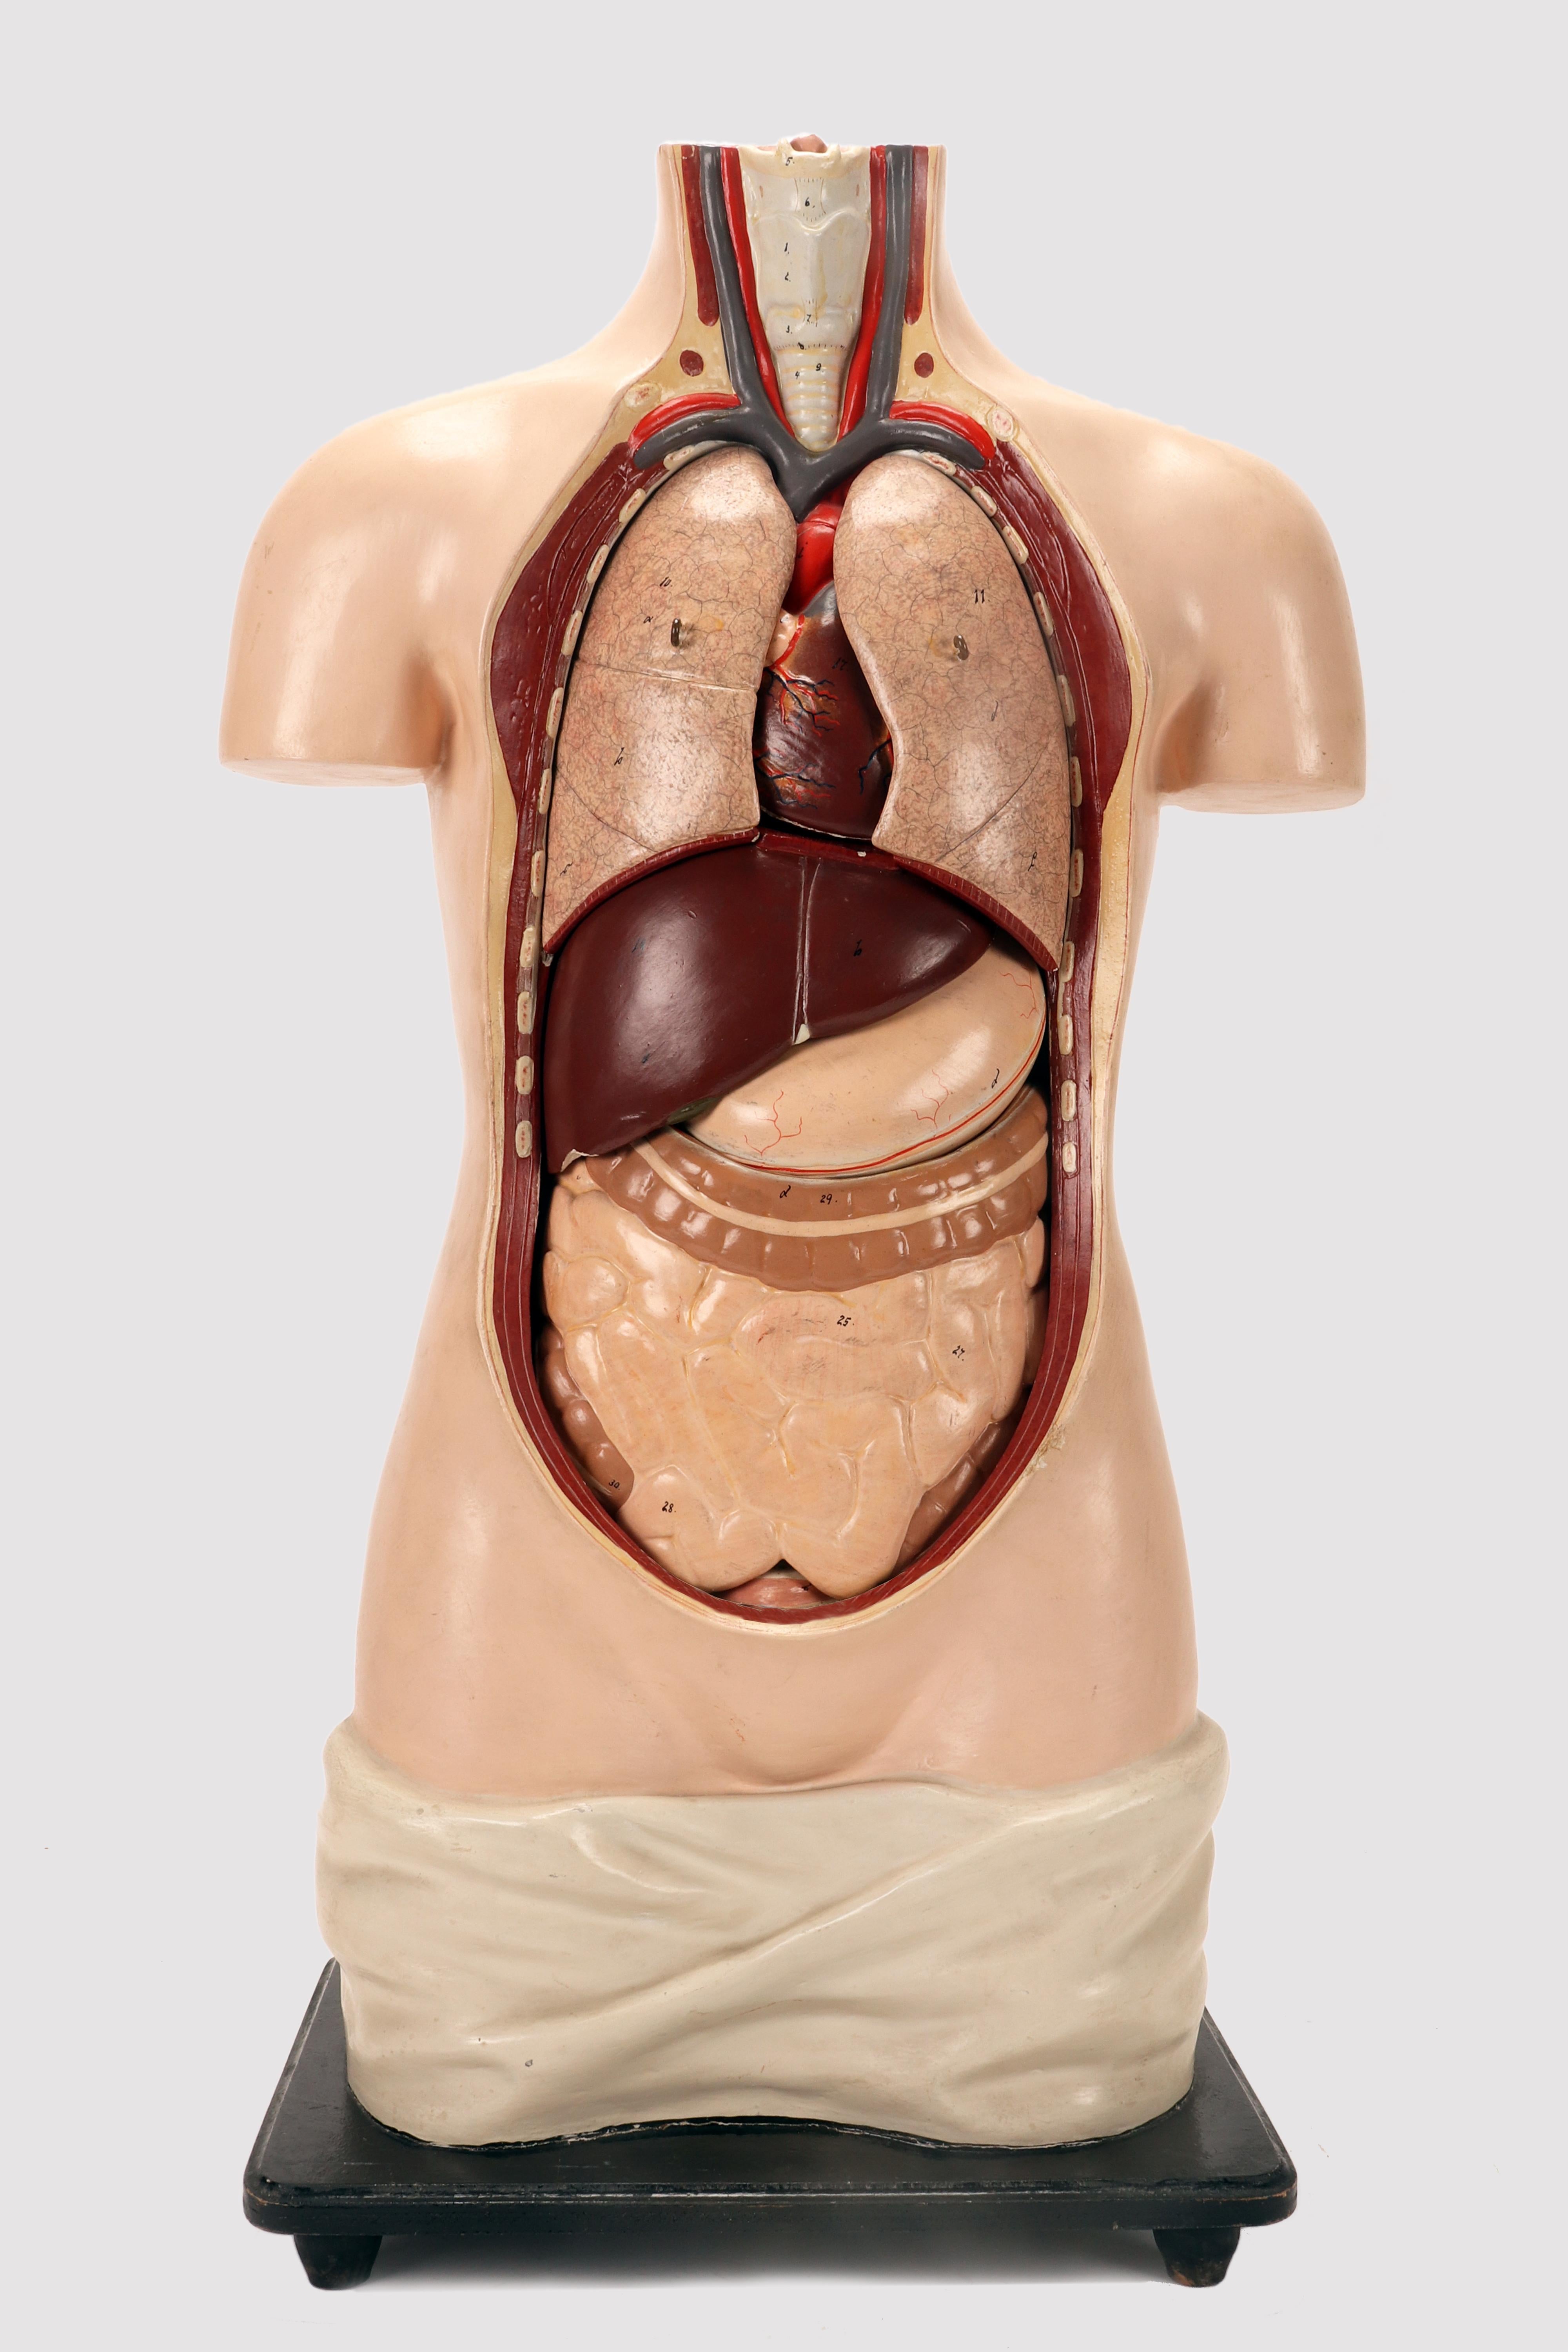 Rare anatomical model for class, depicting a woman’s human bust dissection with all removable organs, complete in all its part. Made out of painted plaster and paper mache, mounted on a black wooden base. Italy end of 19th century.